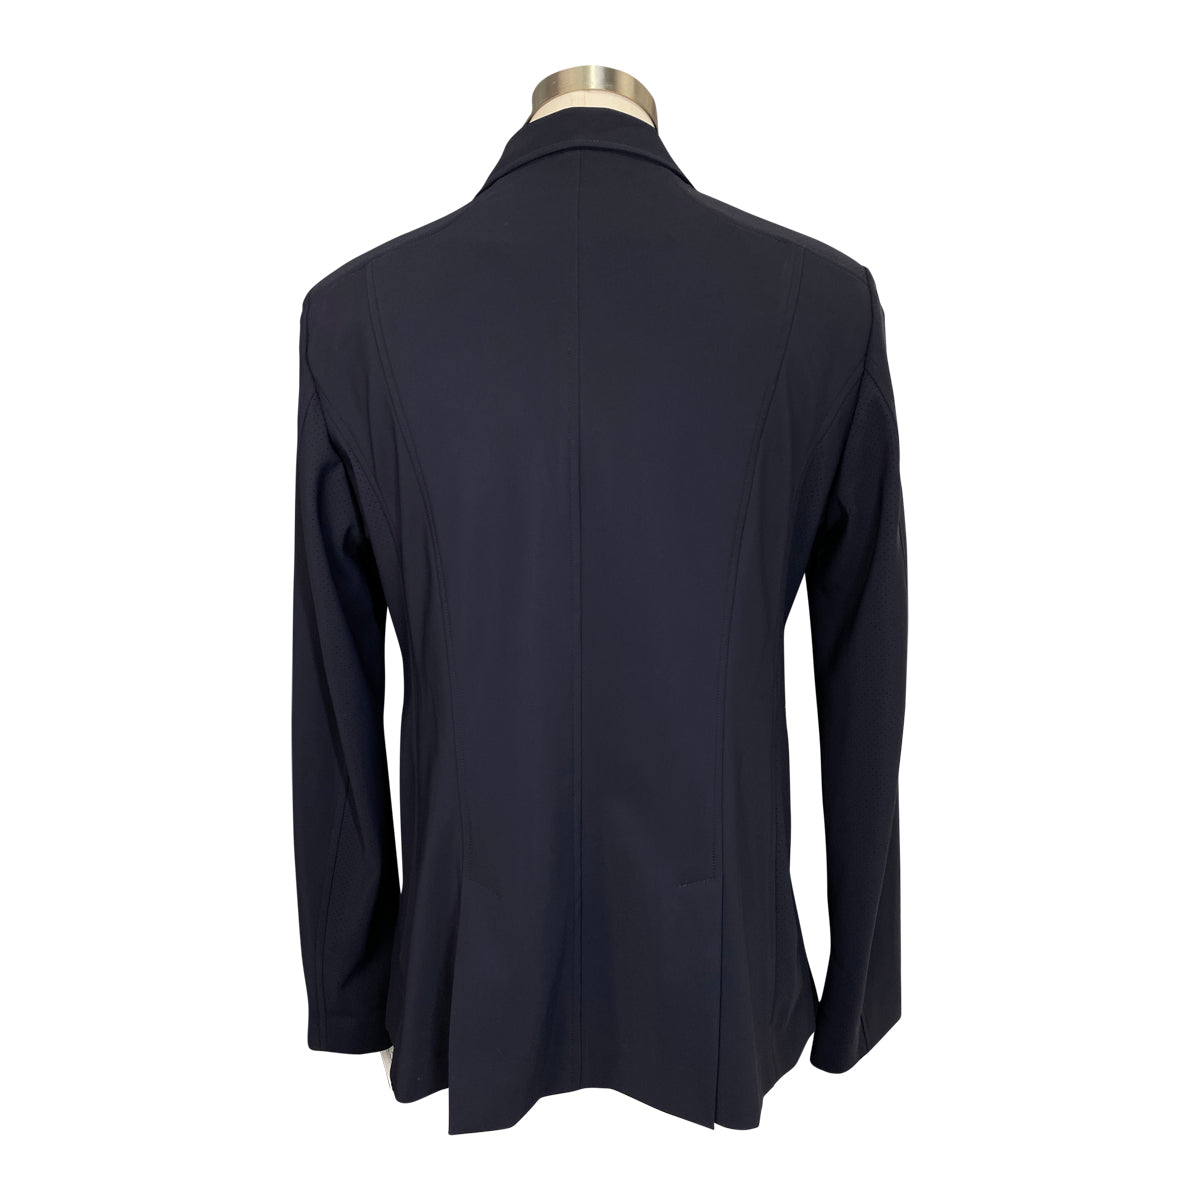 Equiline 'Cordelec' Mens Competition Jacket in Navy